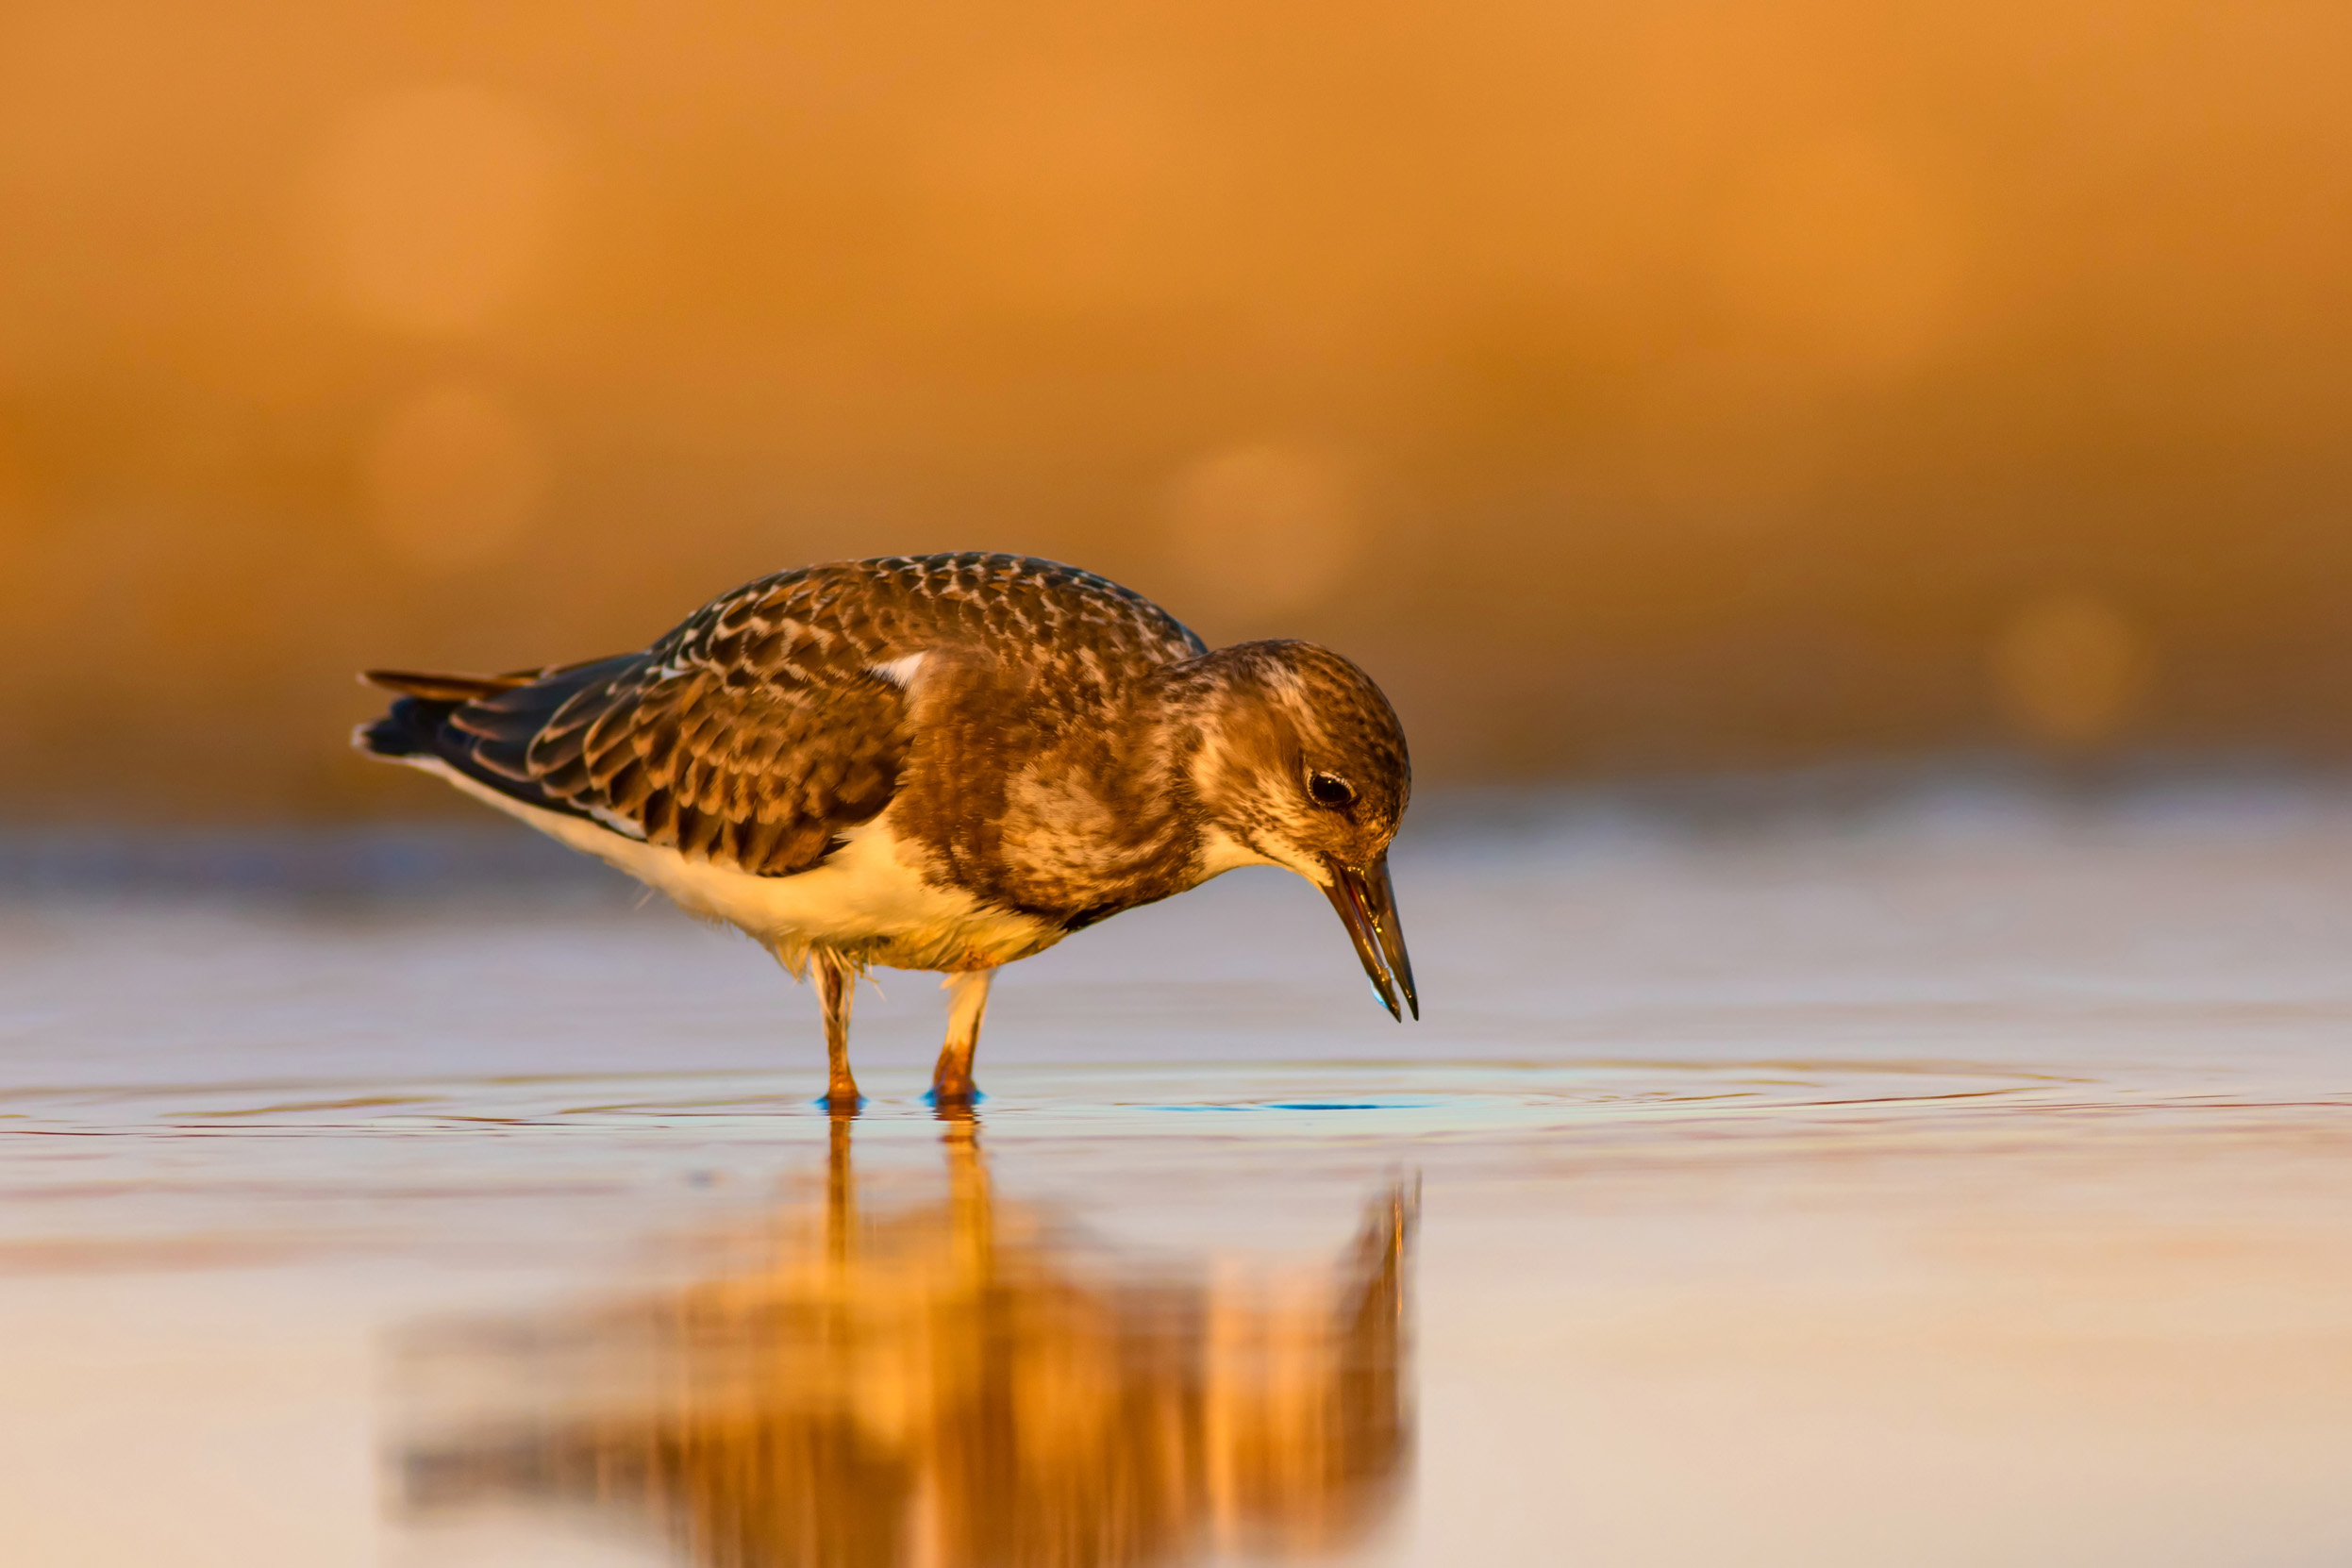 A lone Turnstone in winter plumage looking for food in shallow waters.